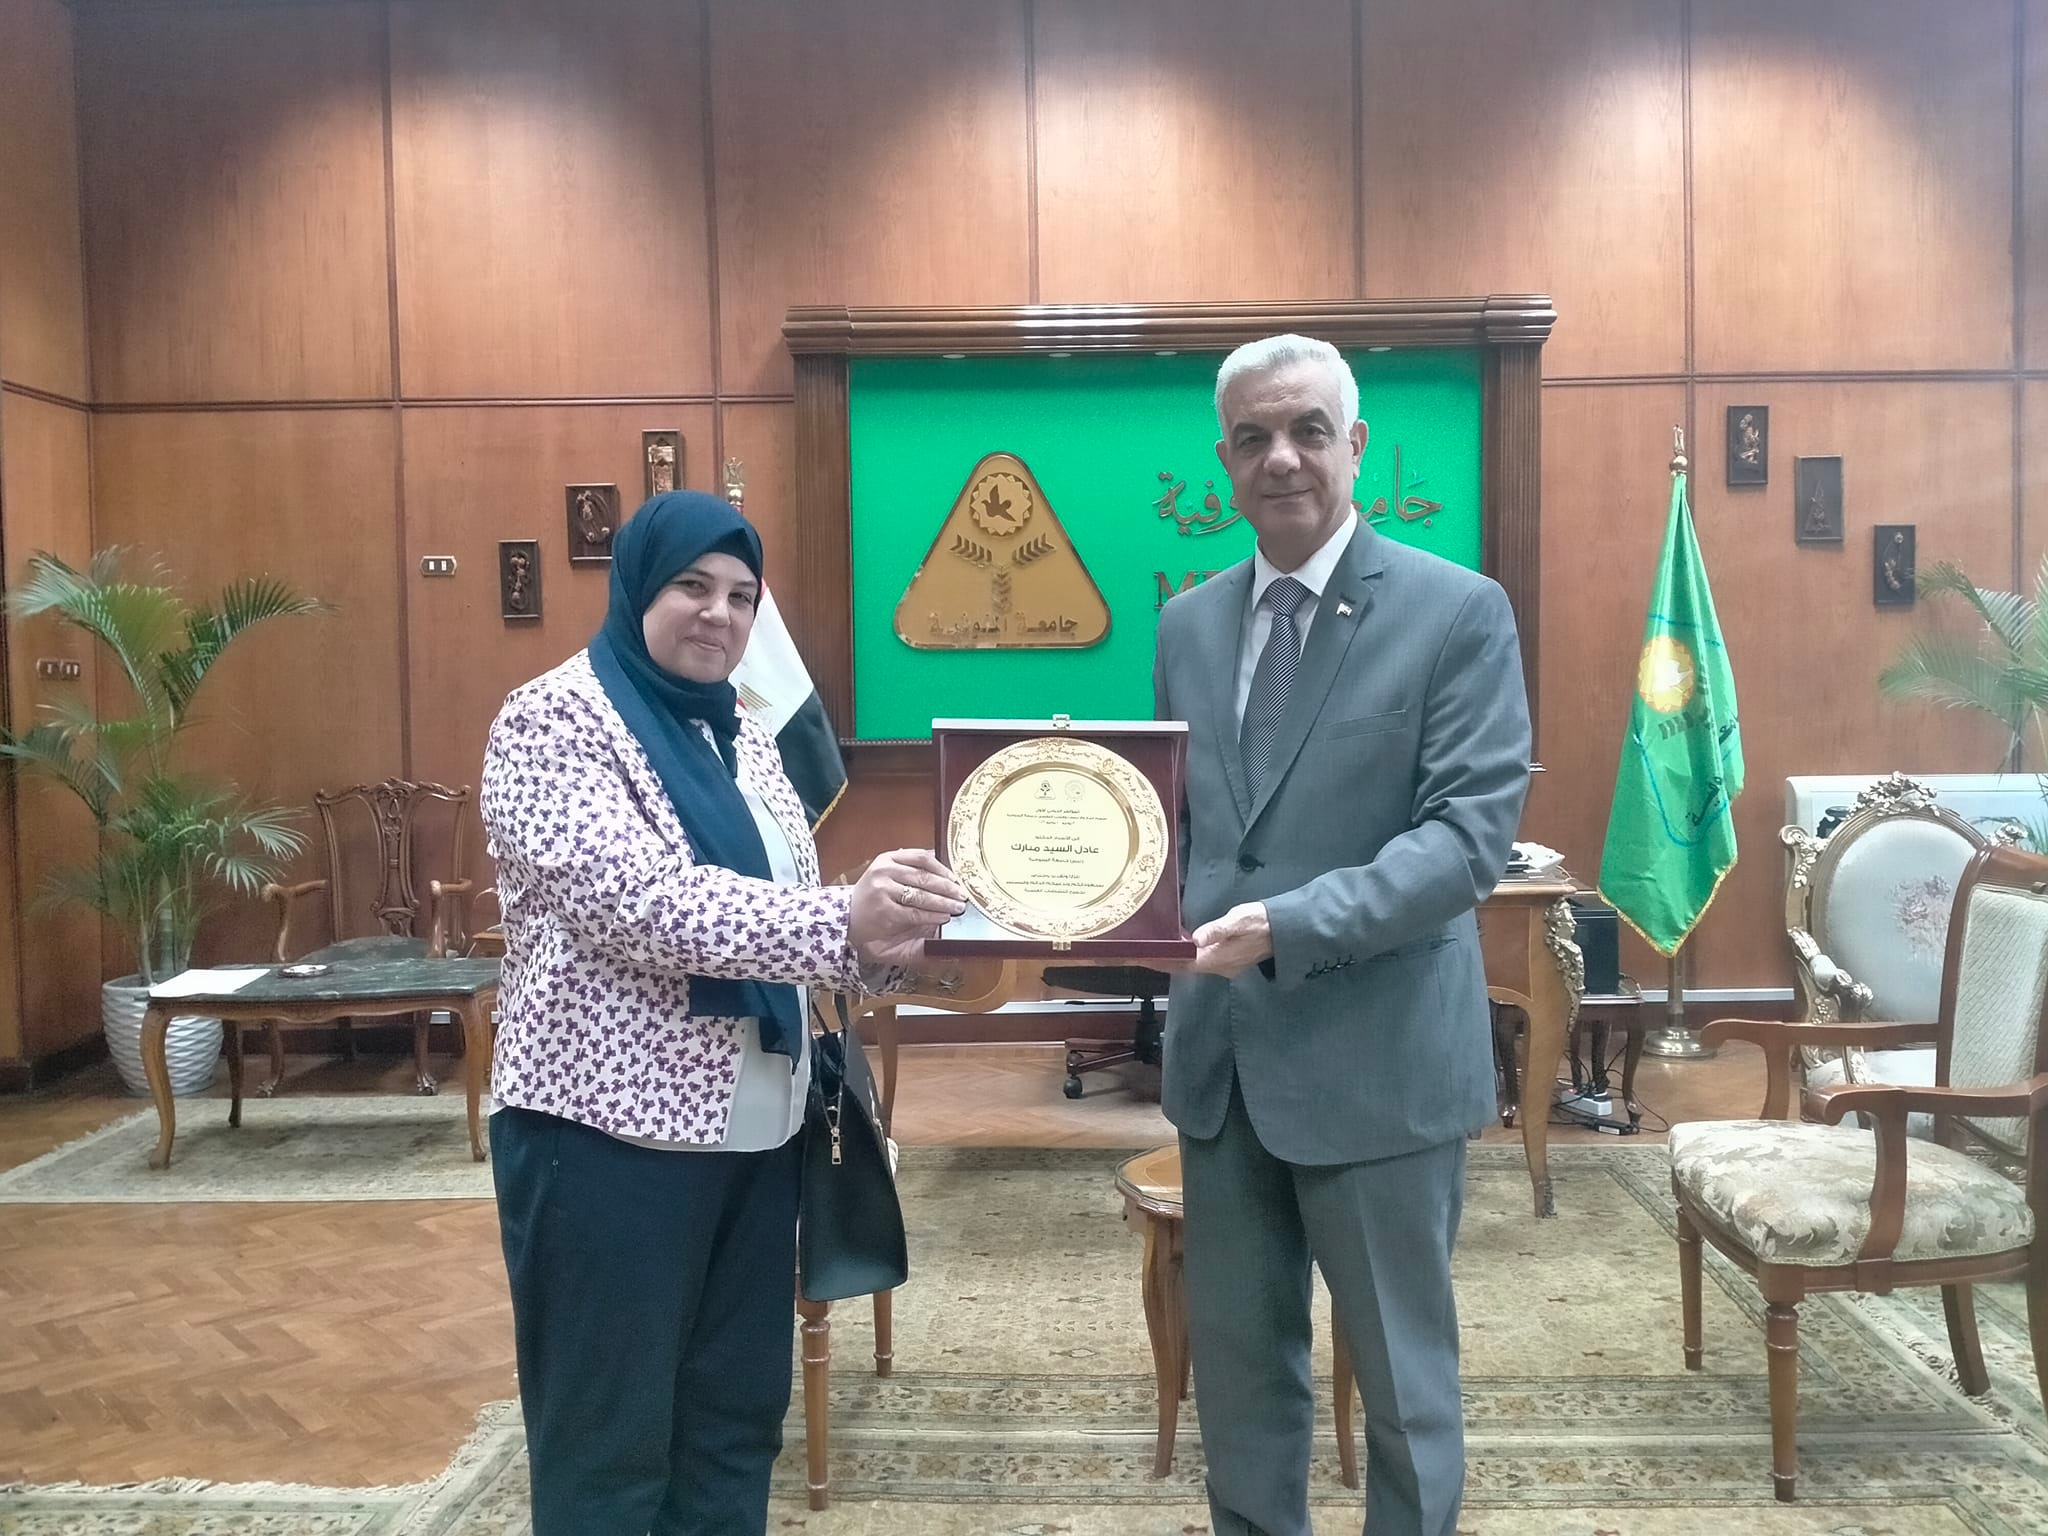 The shield of the first international conference of the Department of Psychiatry and Neurology is presented to the President of Menoufia University